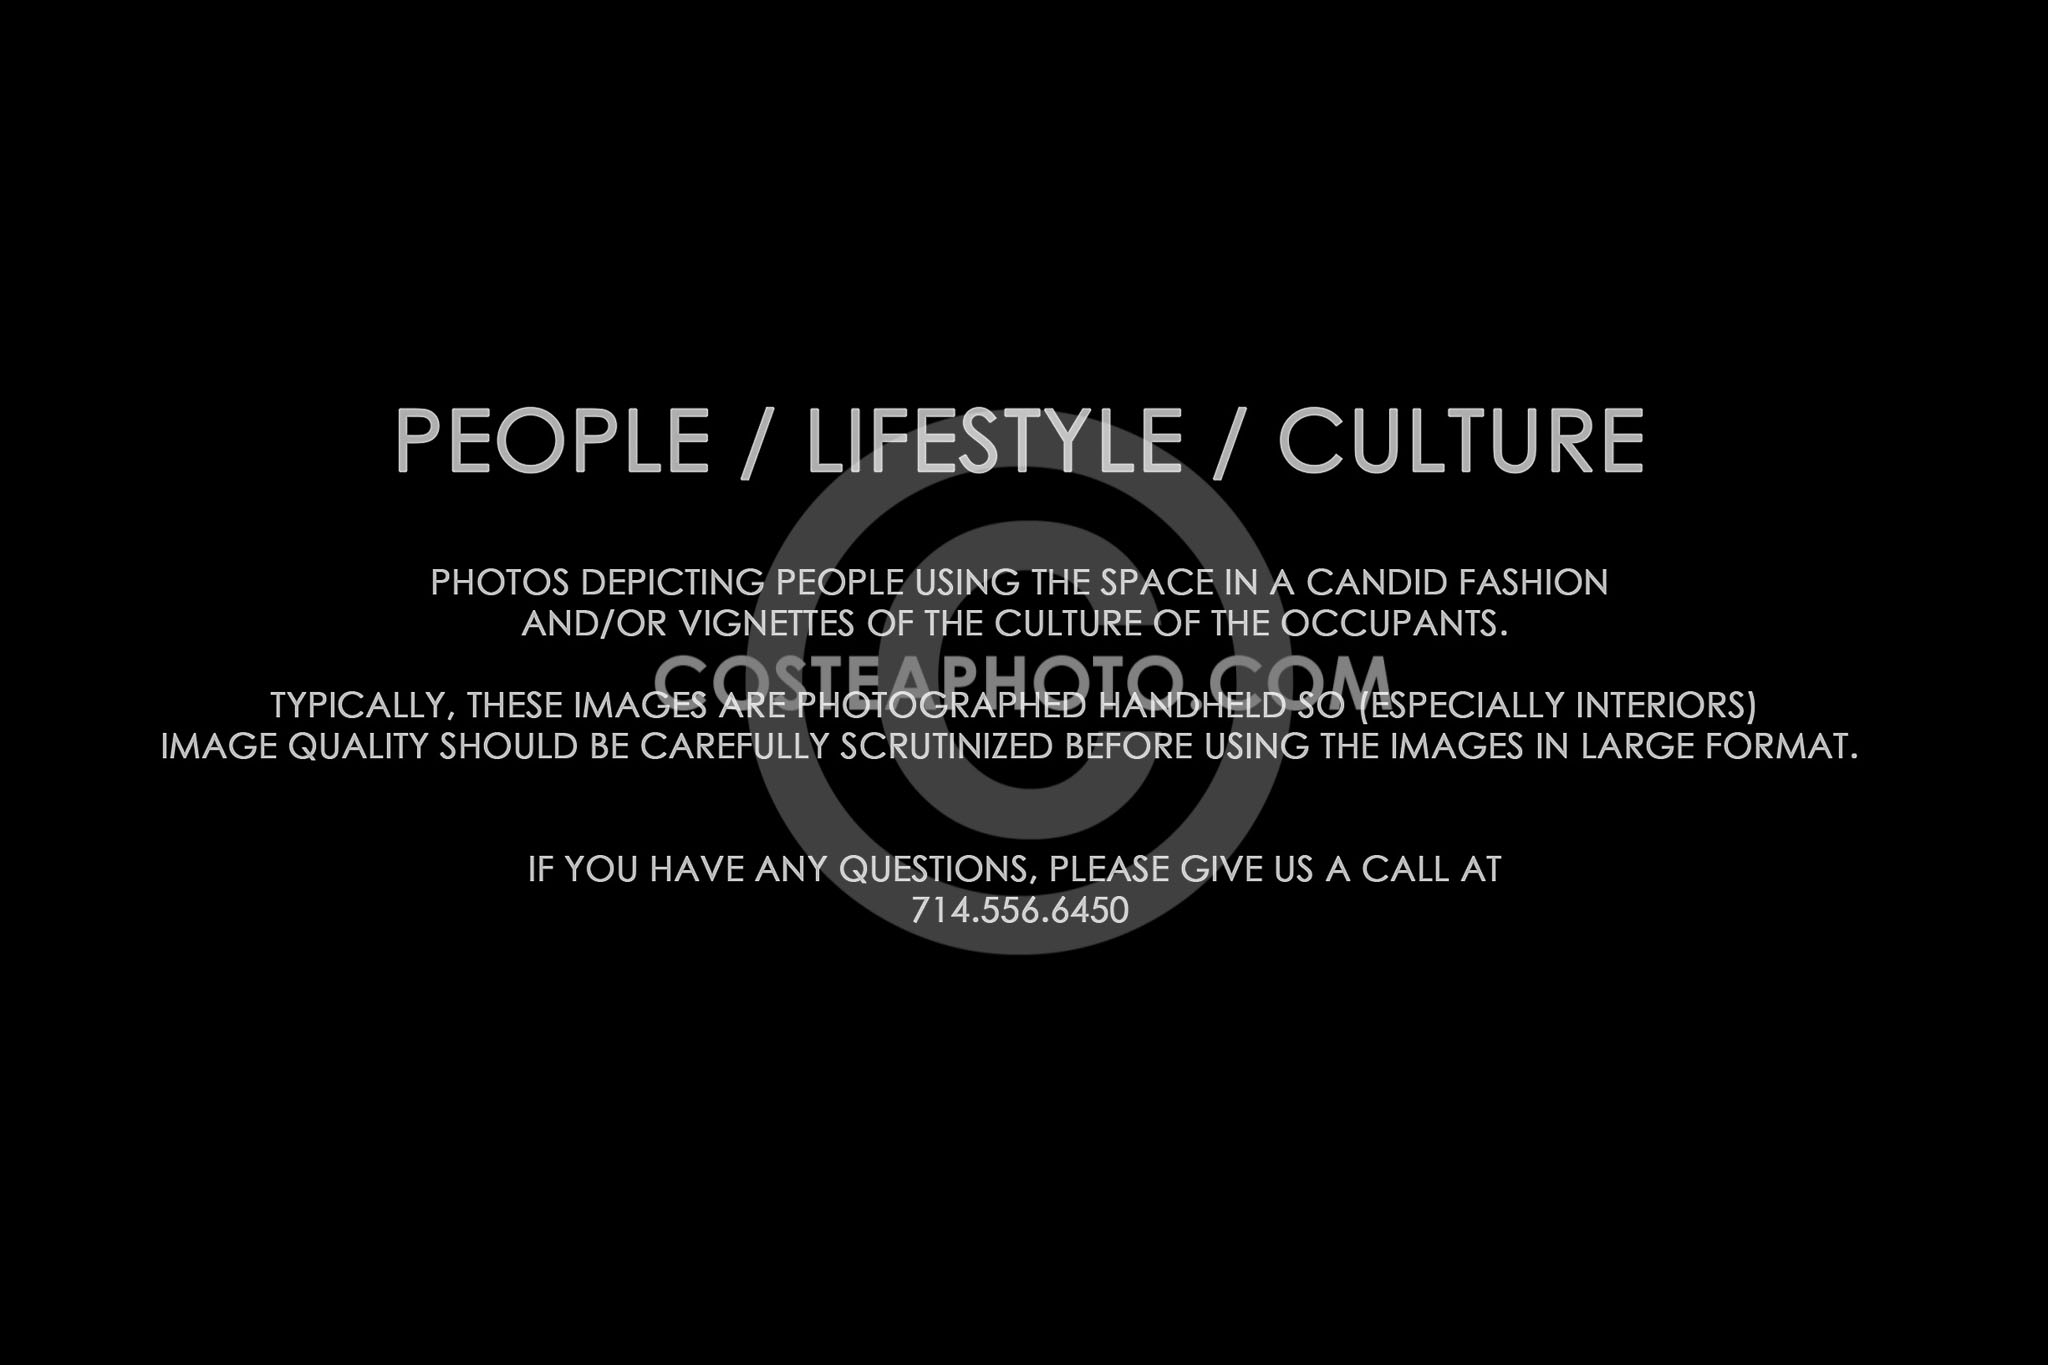 (038) TITLE PAGE - PEOPLE LIFESTYLE